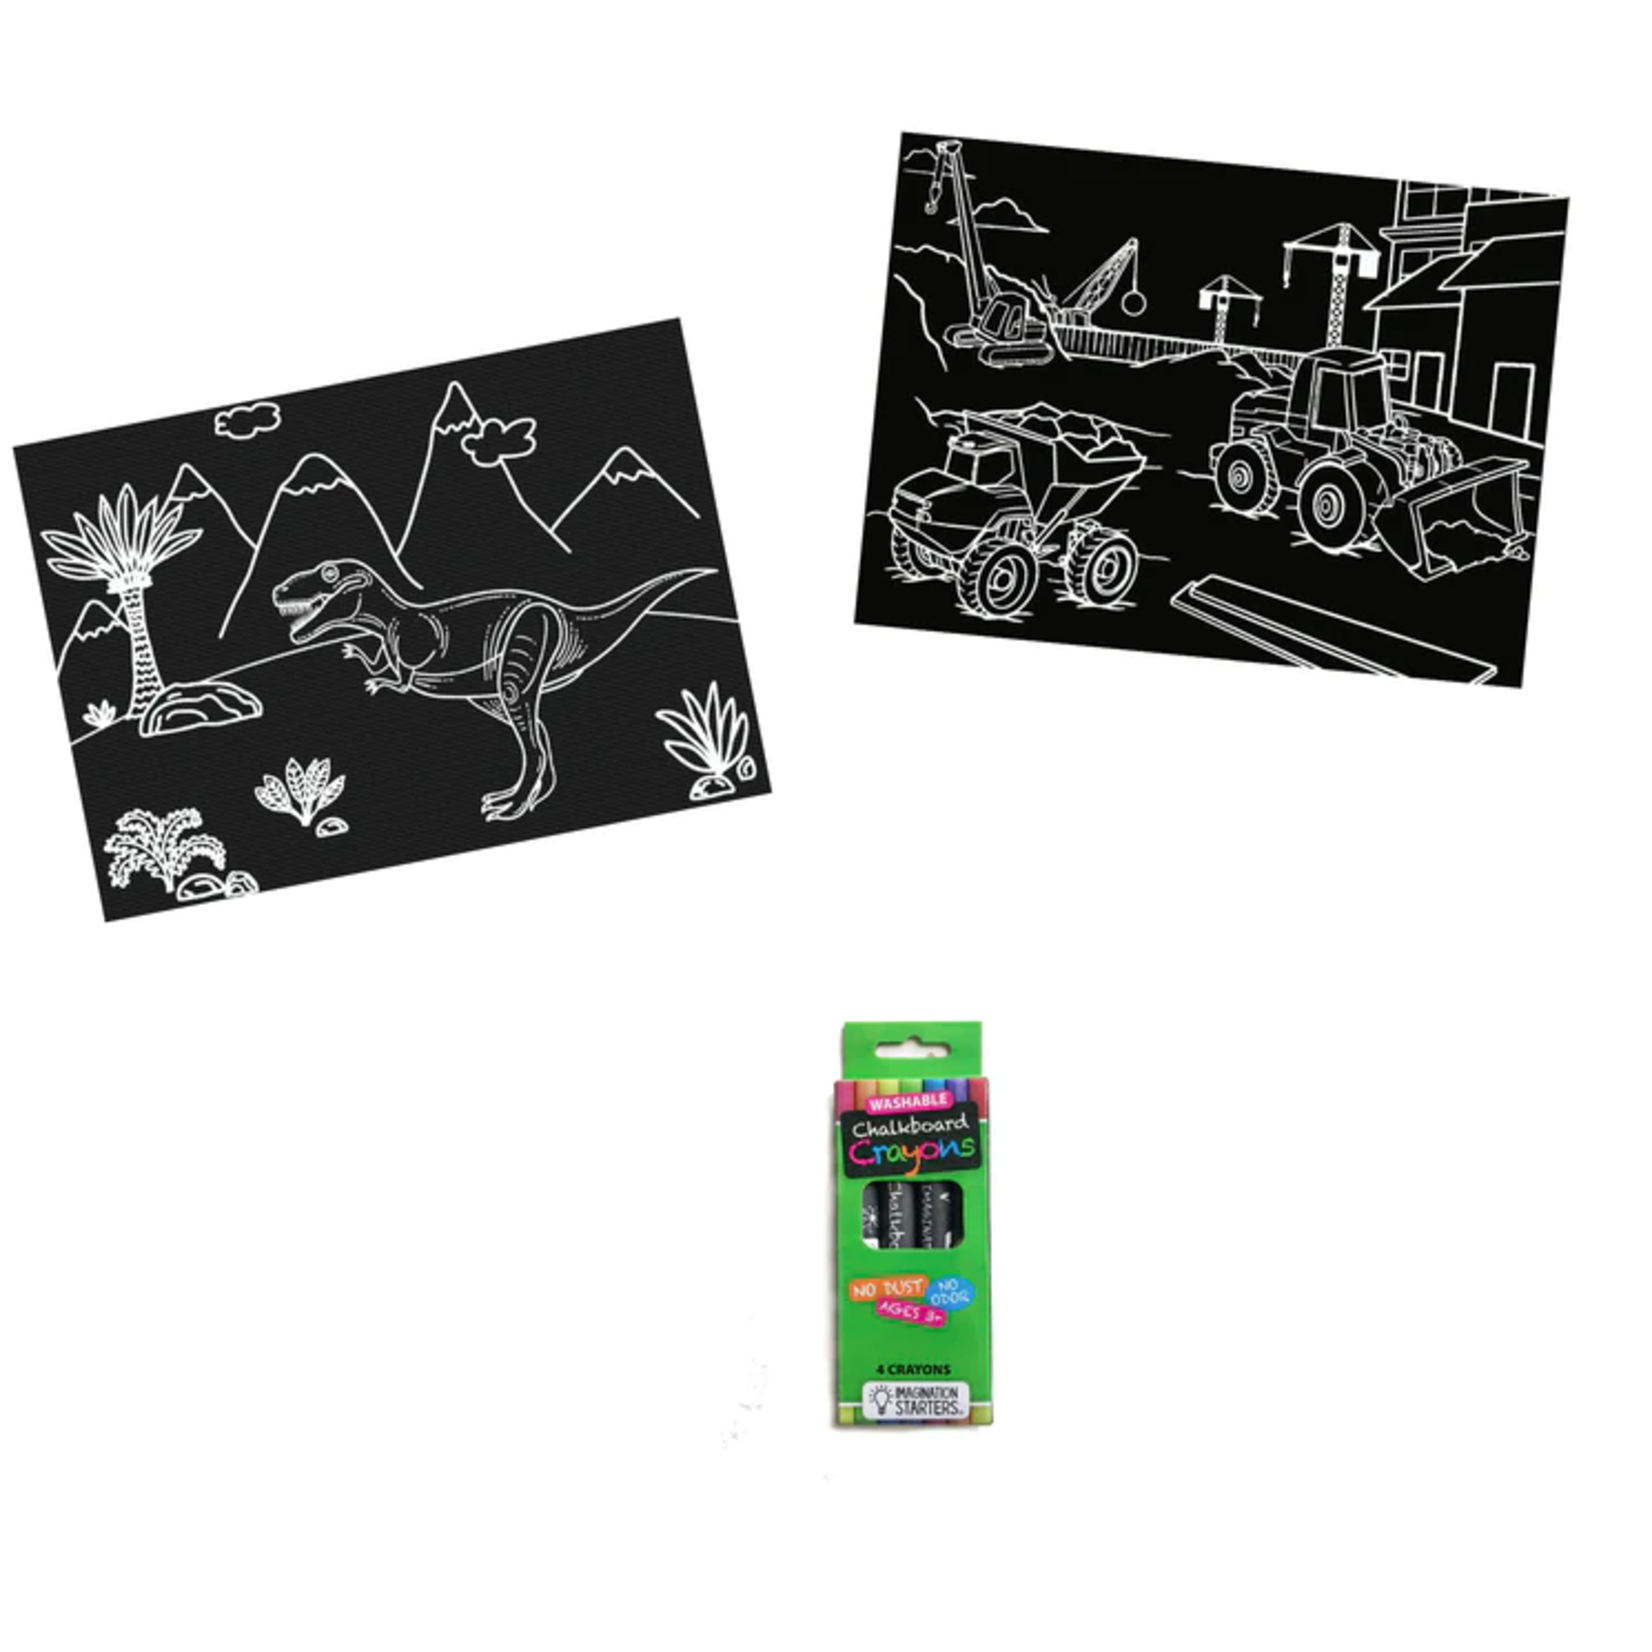 Imagination Starters Chalkboard Coloring Cards - Dino / Truck